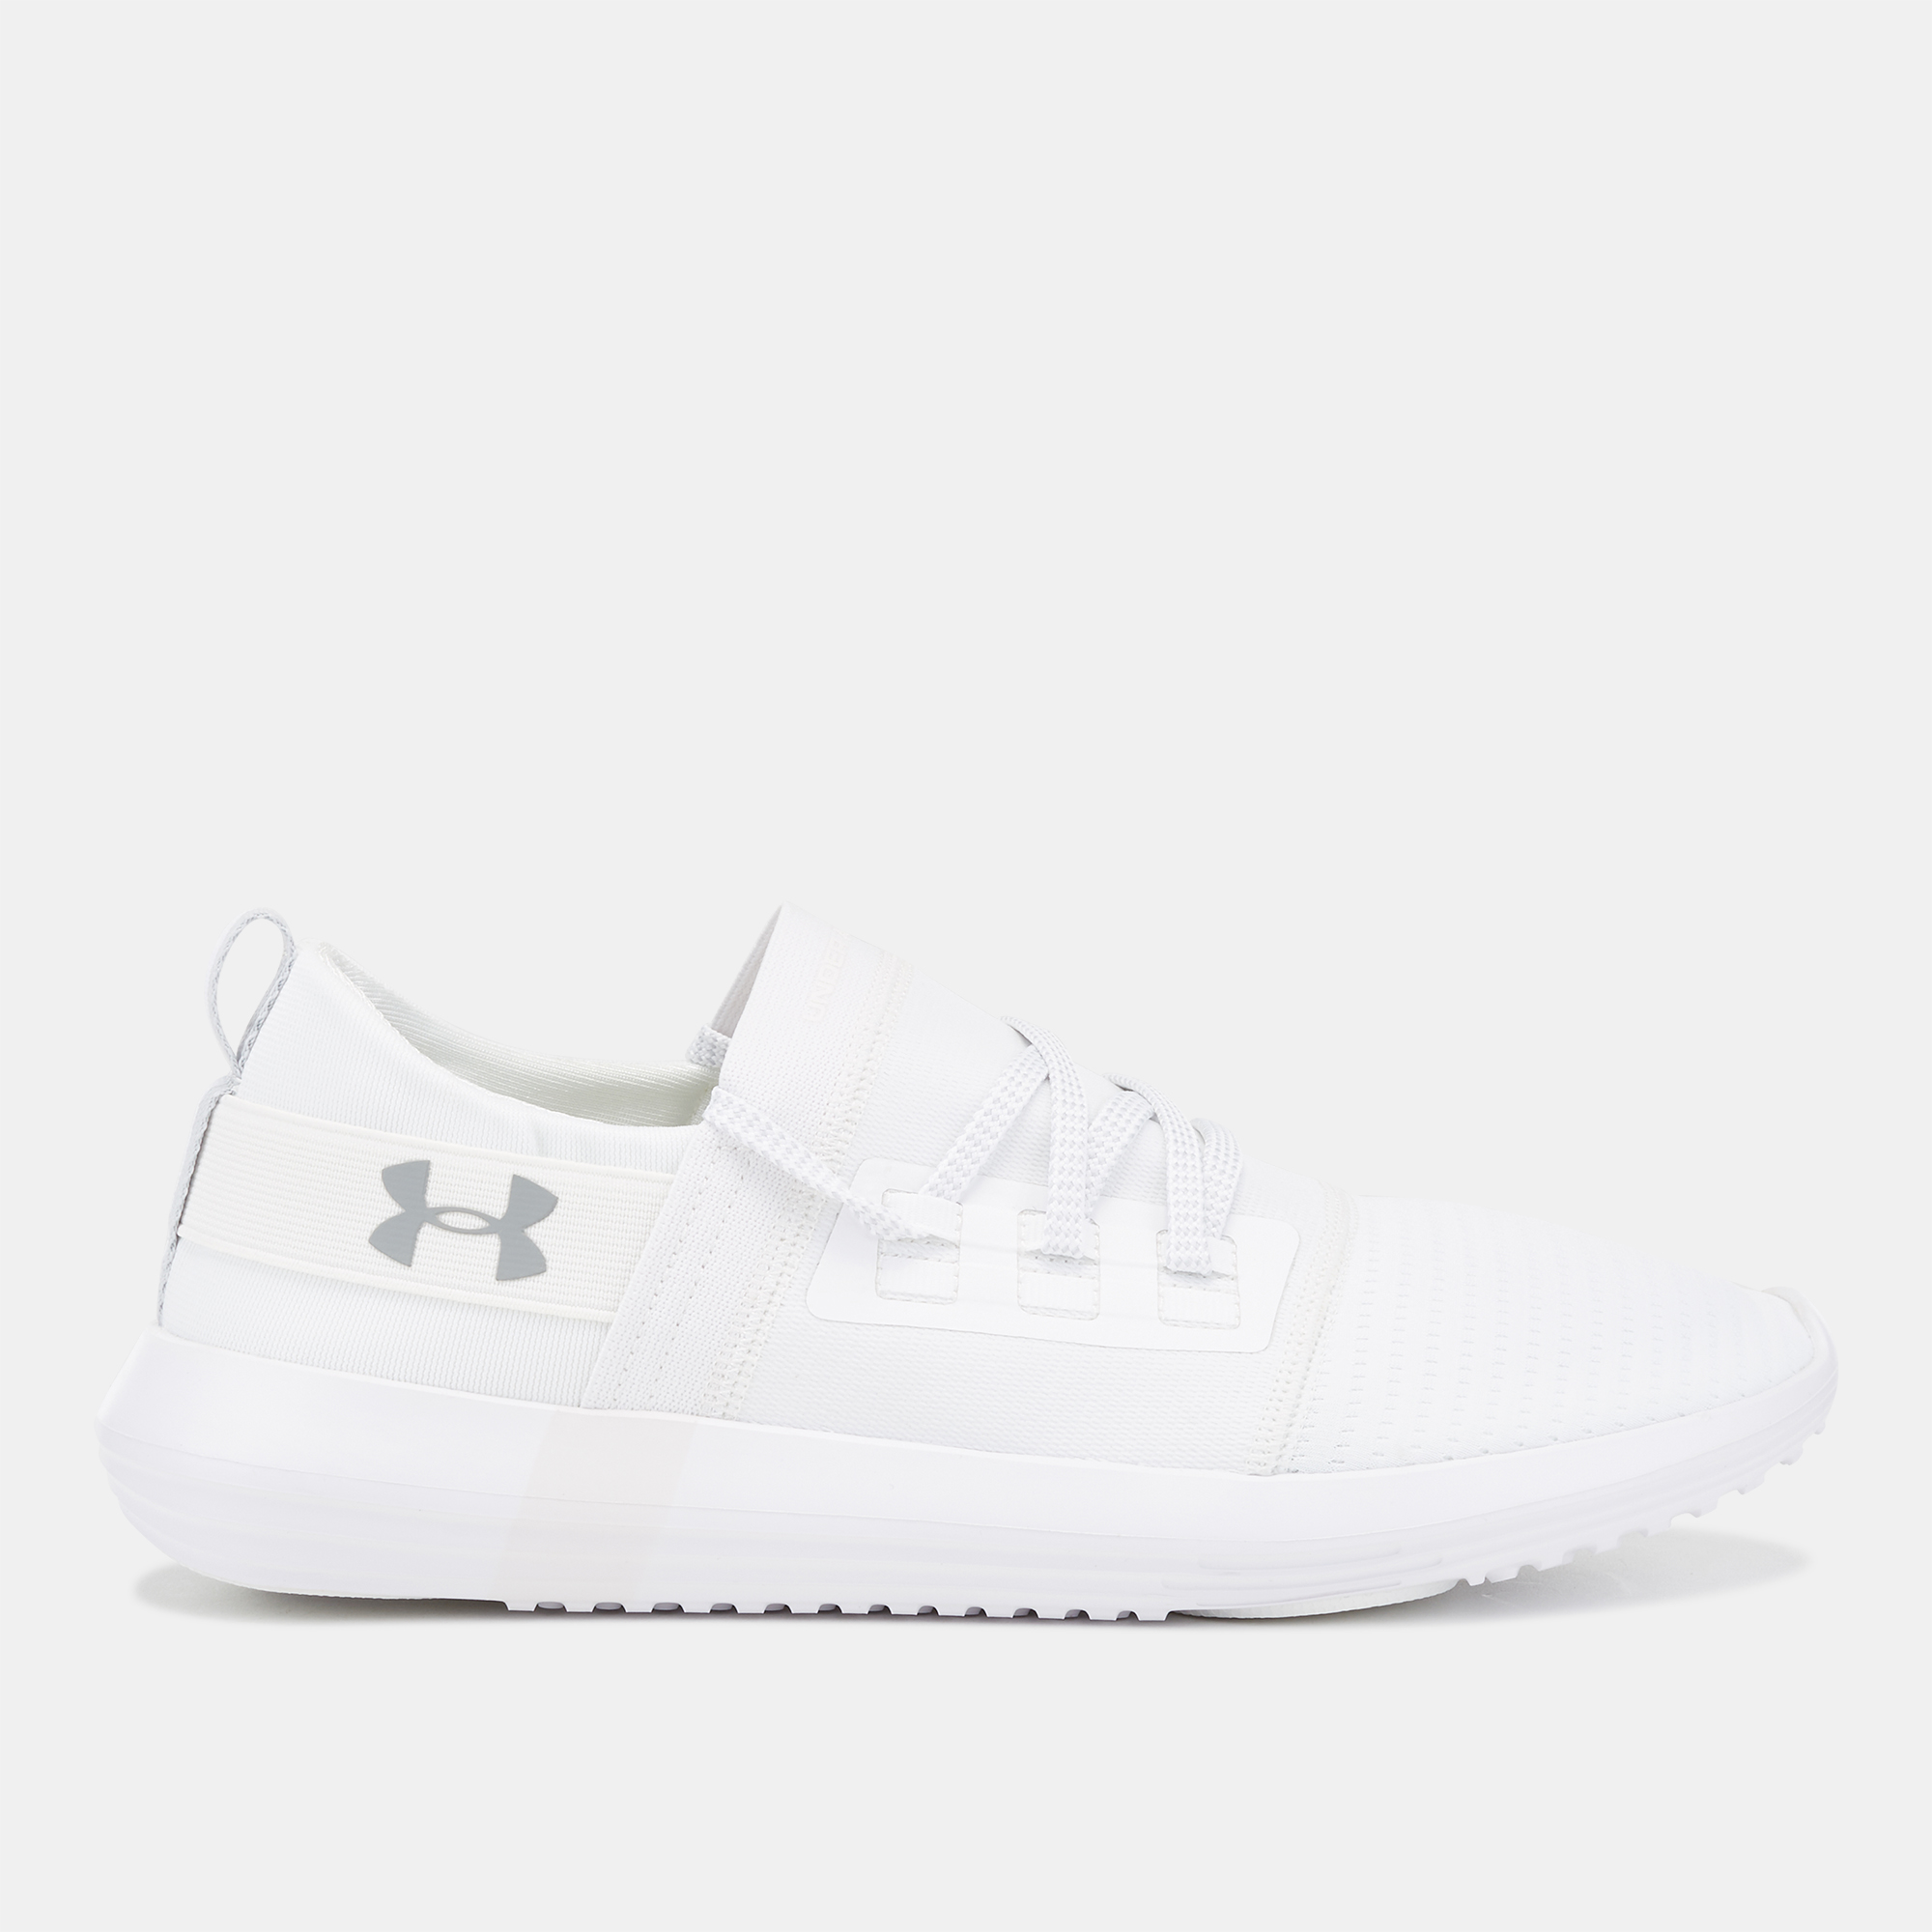 under armour all white shoes